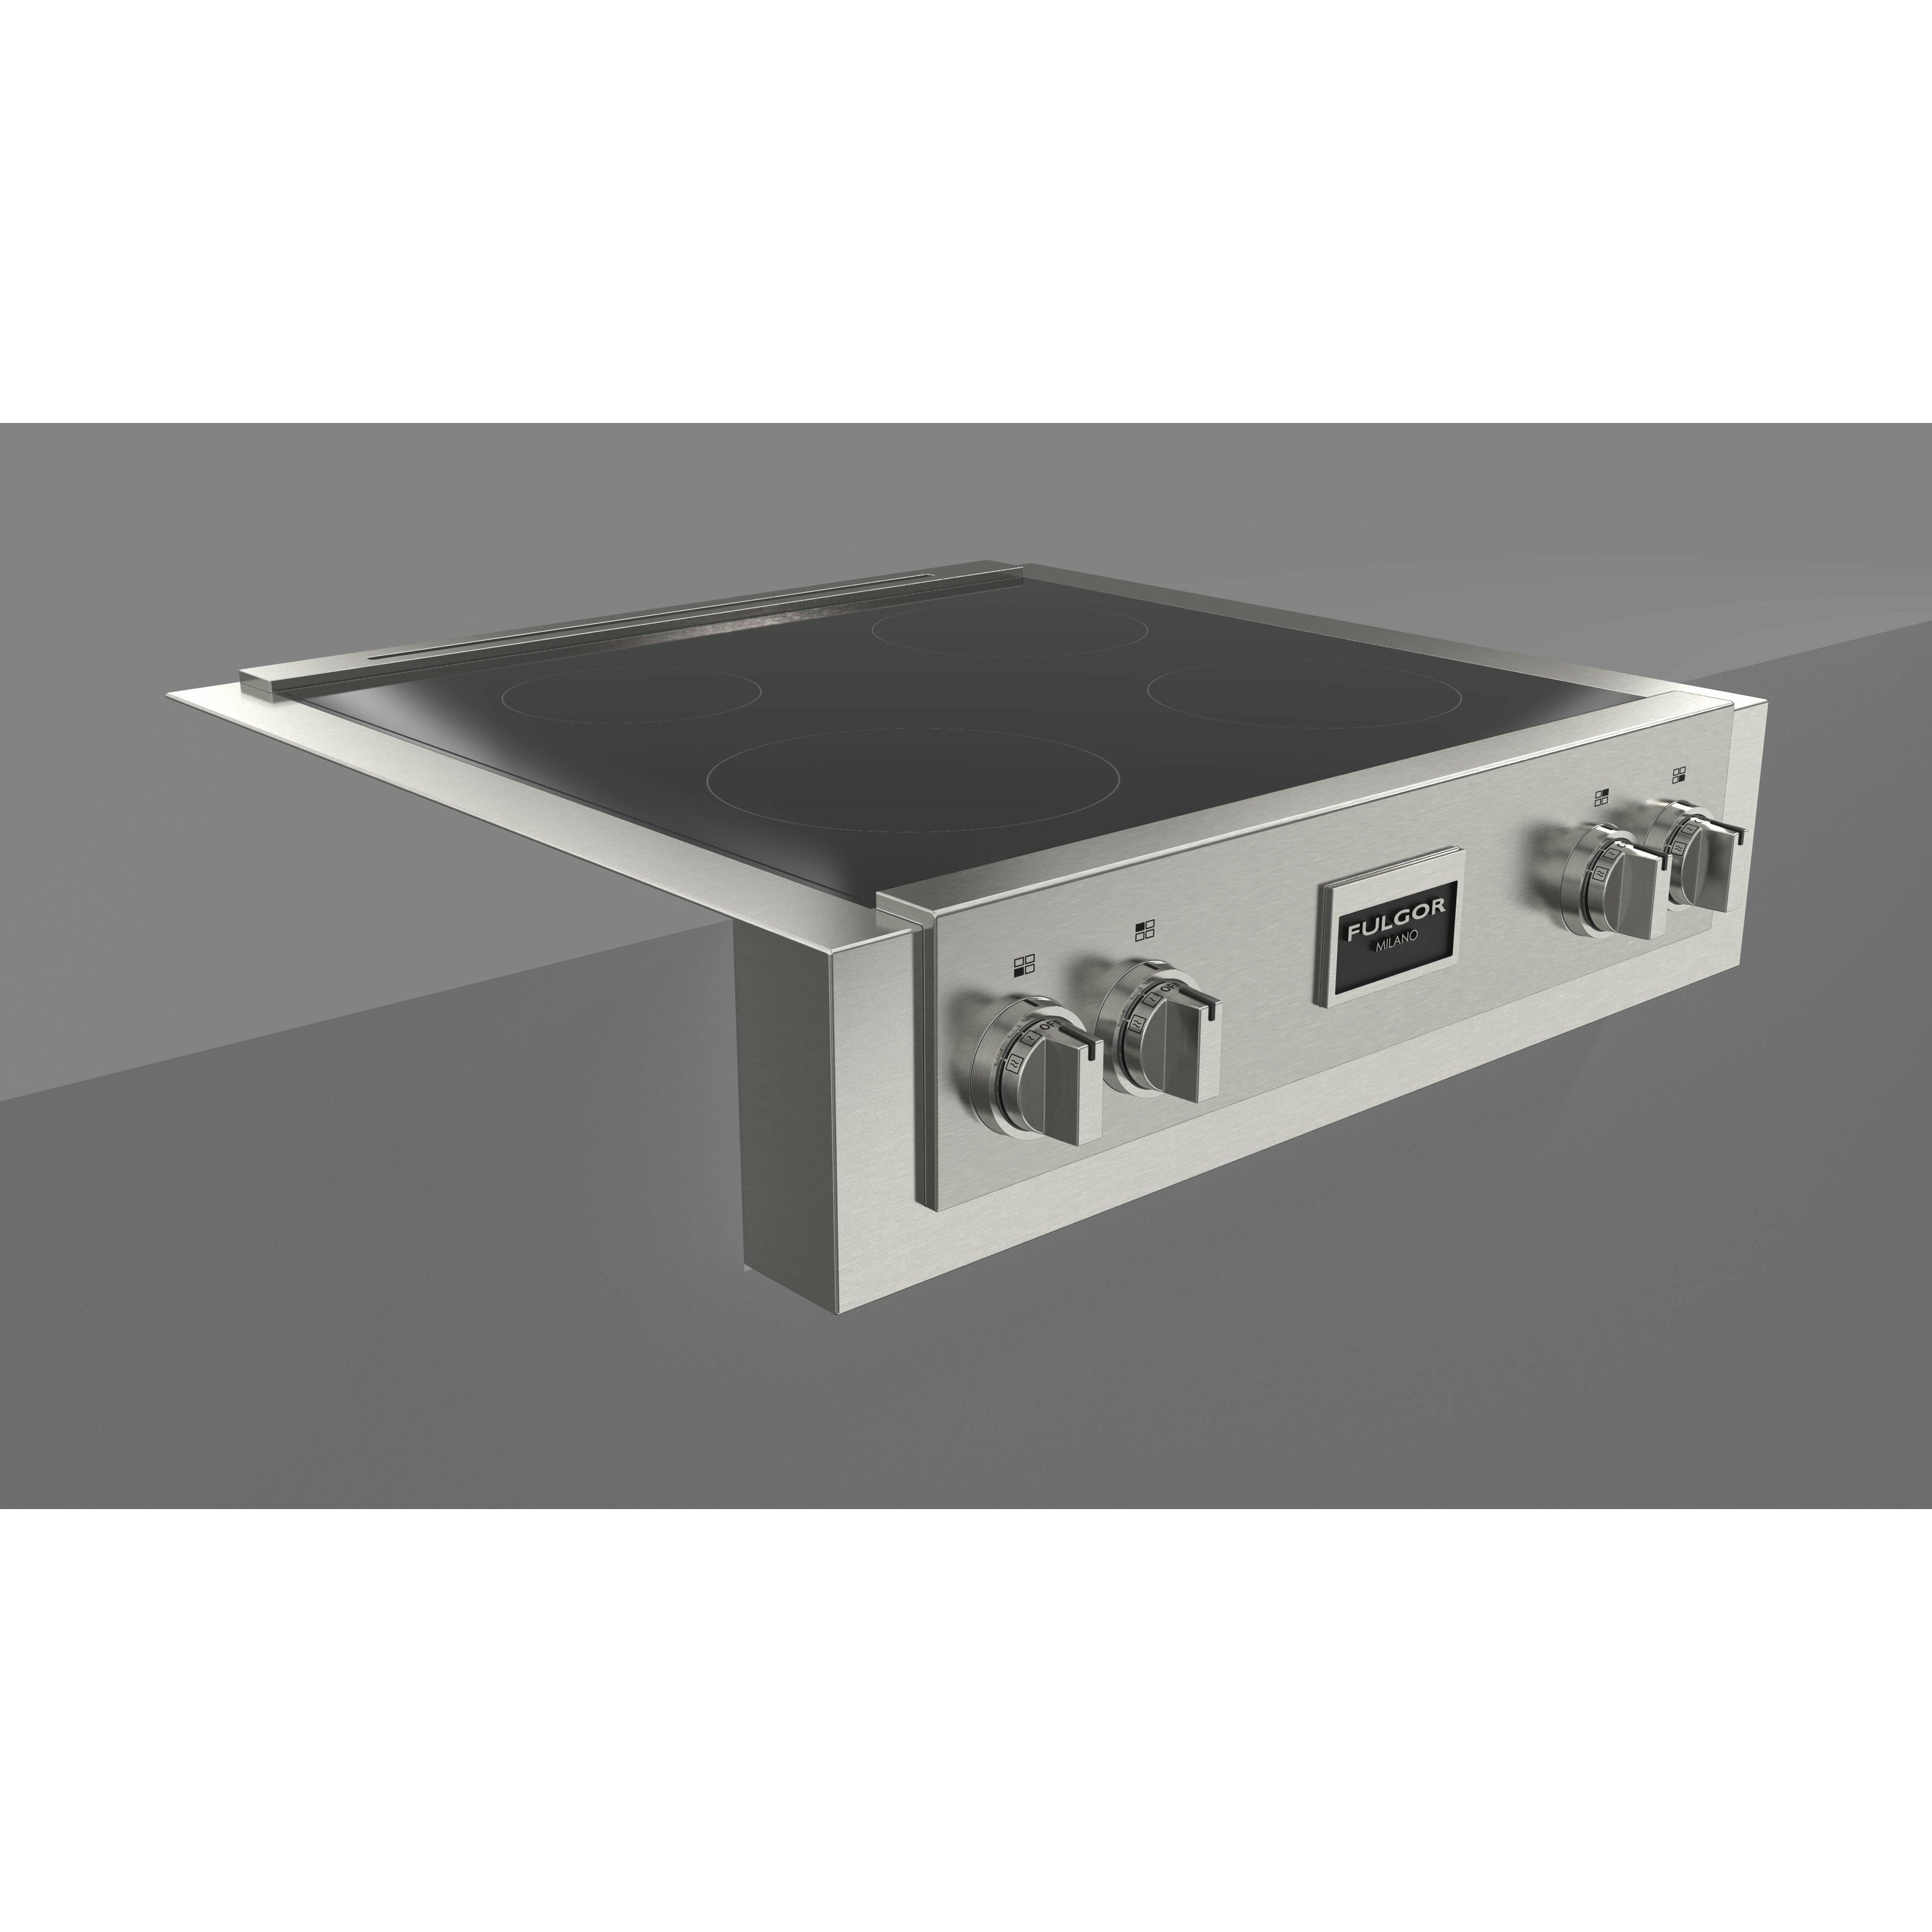 Fulgor Milano 30" Induction Rangetop with 4 Cooking Zones, Stainless Steel - F6IRT304S1